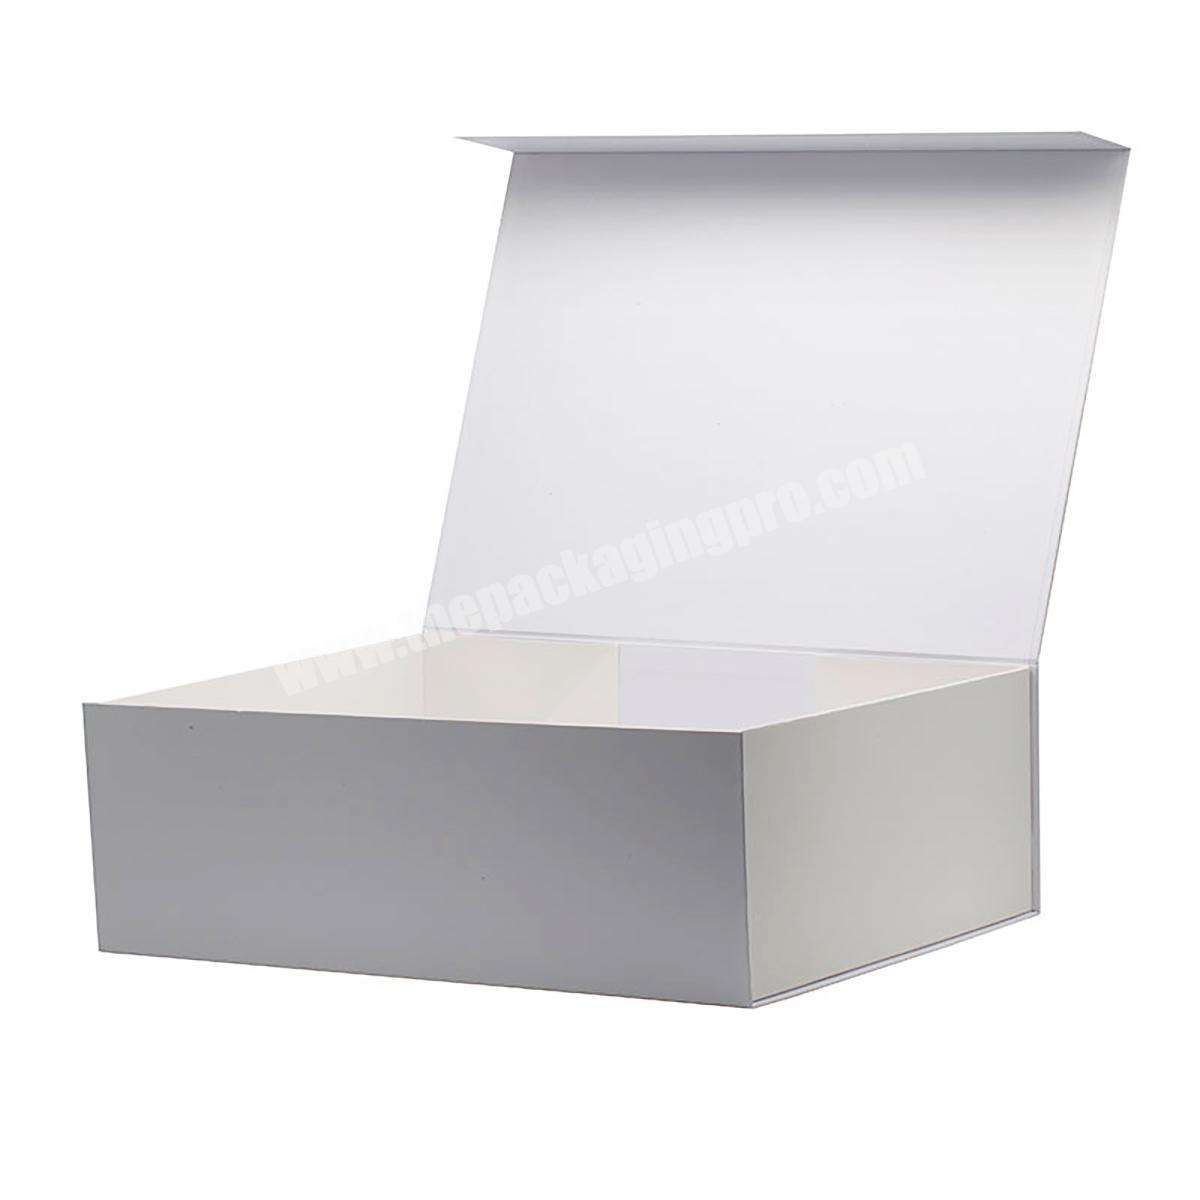 Custom Luxury Recycled Unique Foldable Cardboard Flat Pack Gift Folding Box Packaging